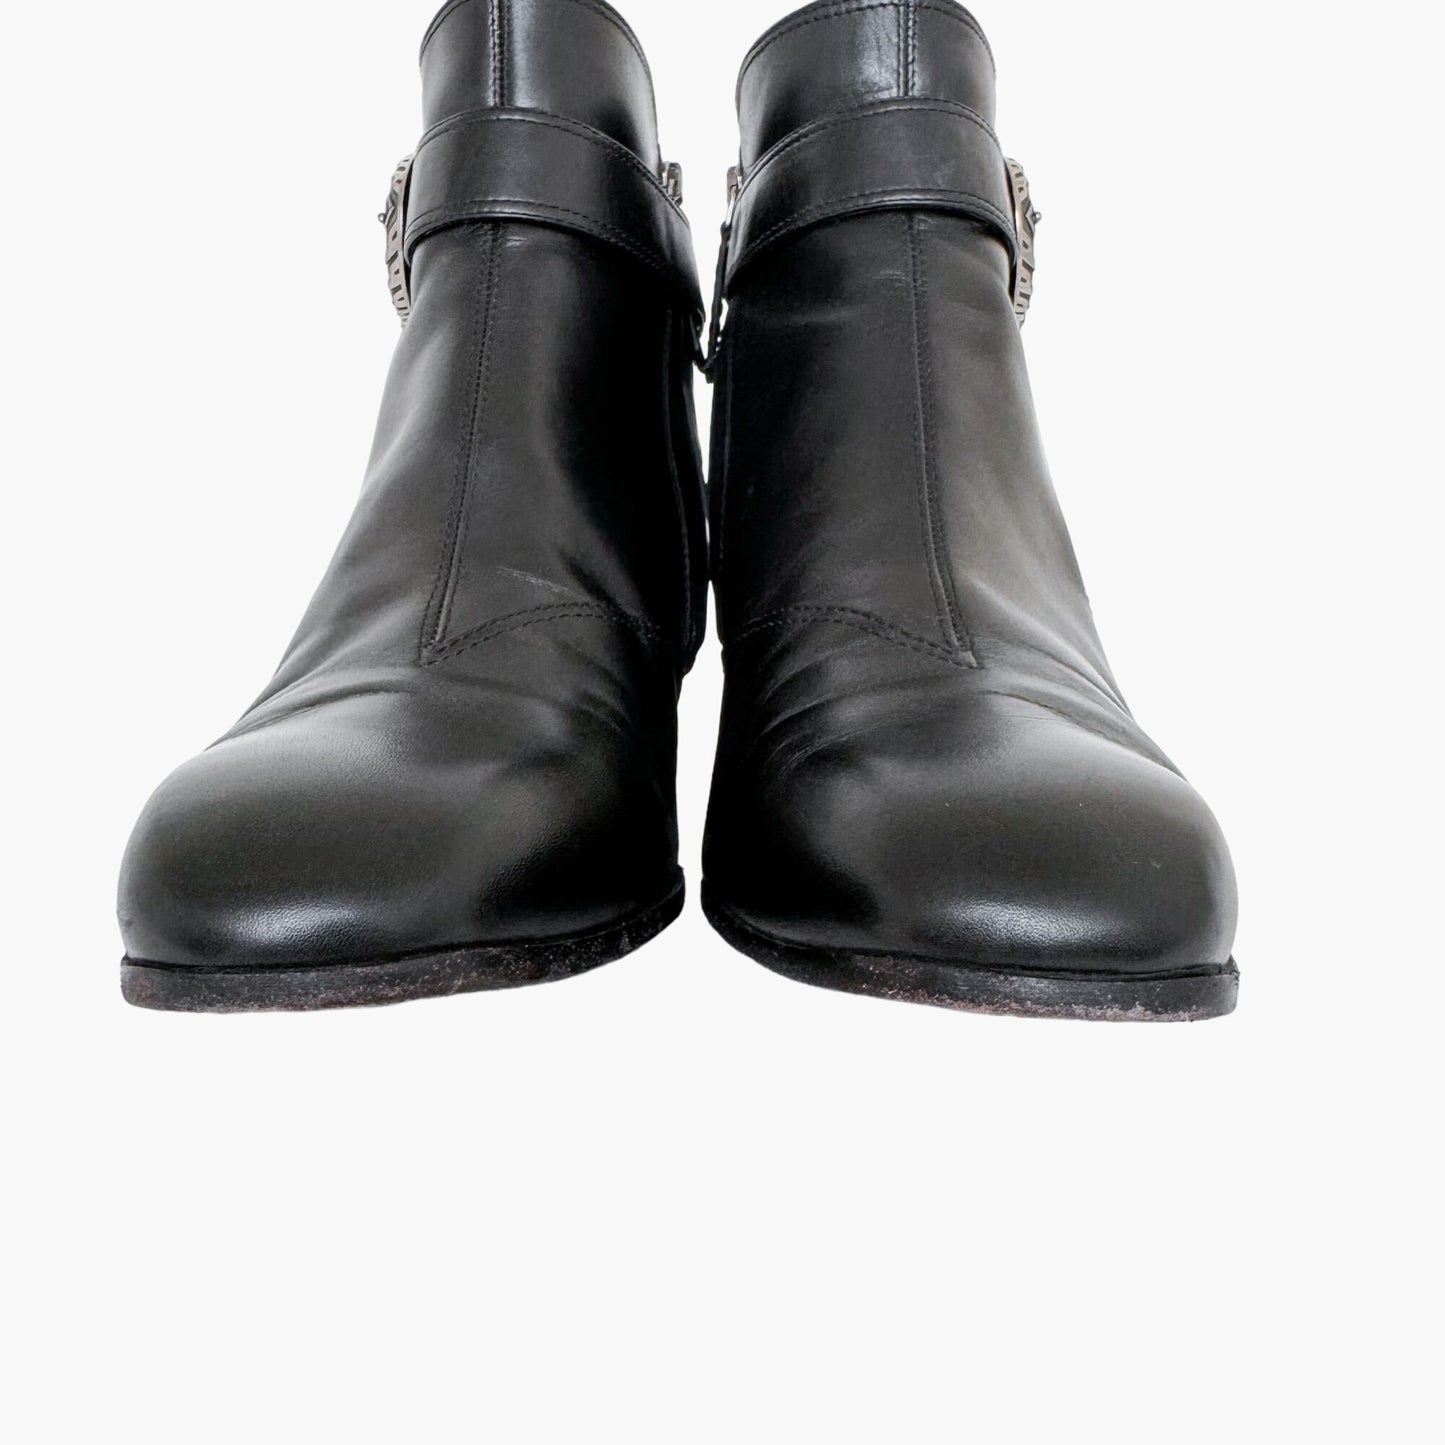 Gucci Dionysus Elizabeth Ankle Boots in Black Leather Size 41